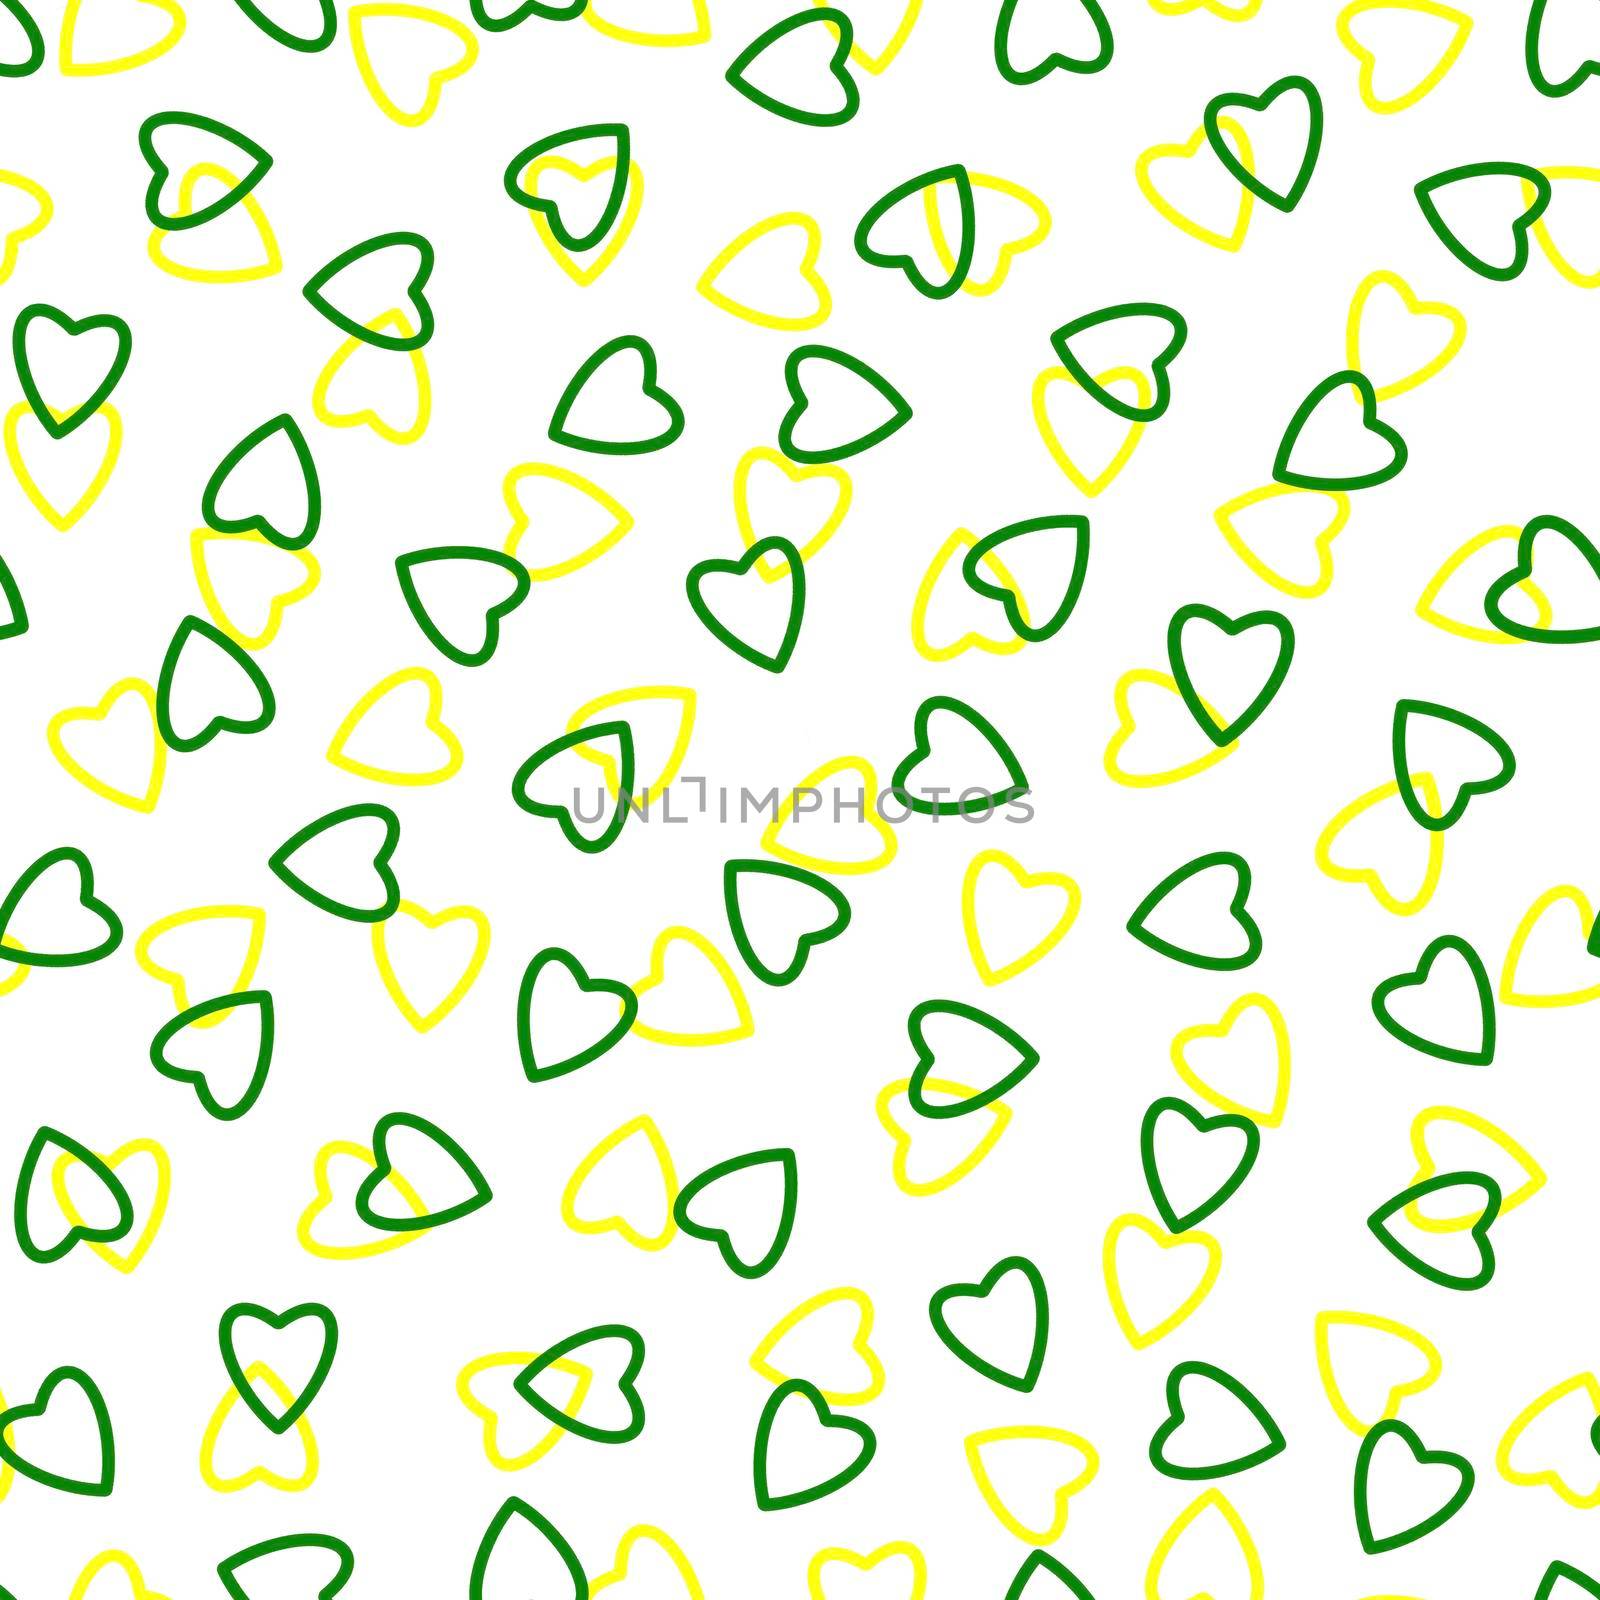 Simple hearts seamless pattern,endless chaotic texture made tiny heart silhouettes.Valentines,mothers day background.Great for Easter,wedding,scrapbook,gift wrapping paper,textiles.Green,yellow,white by Angelsmoon